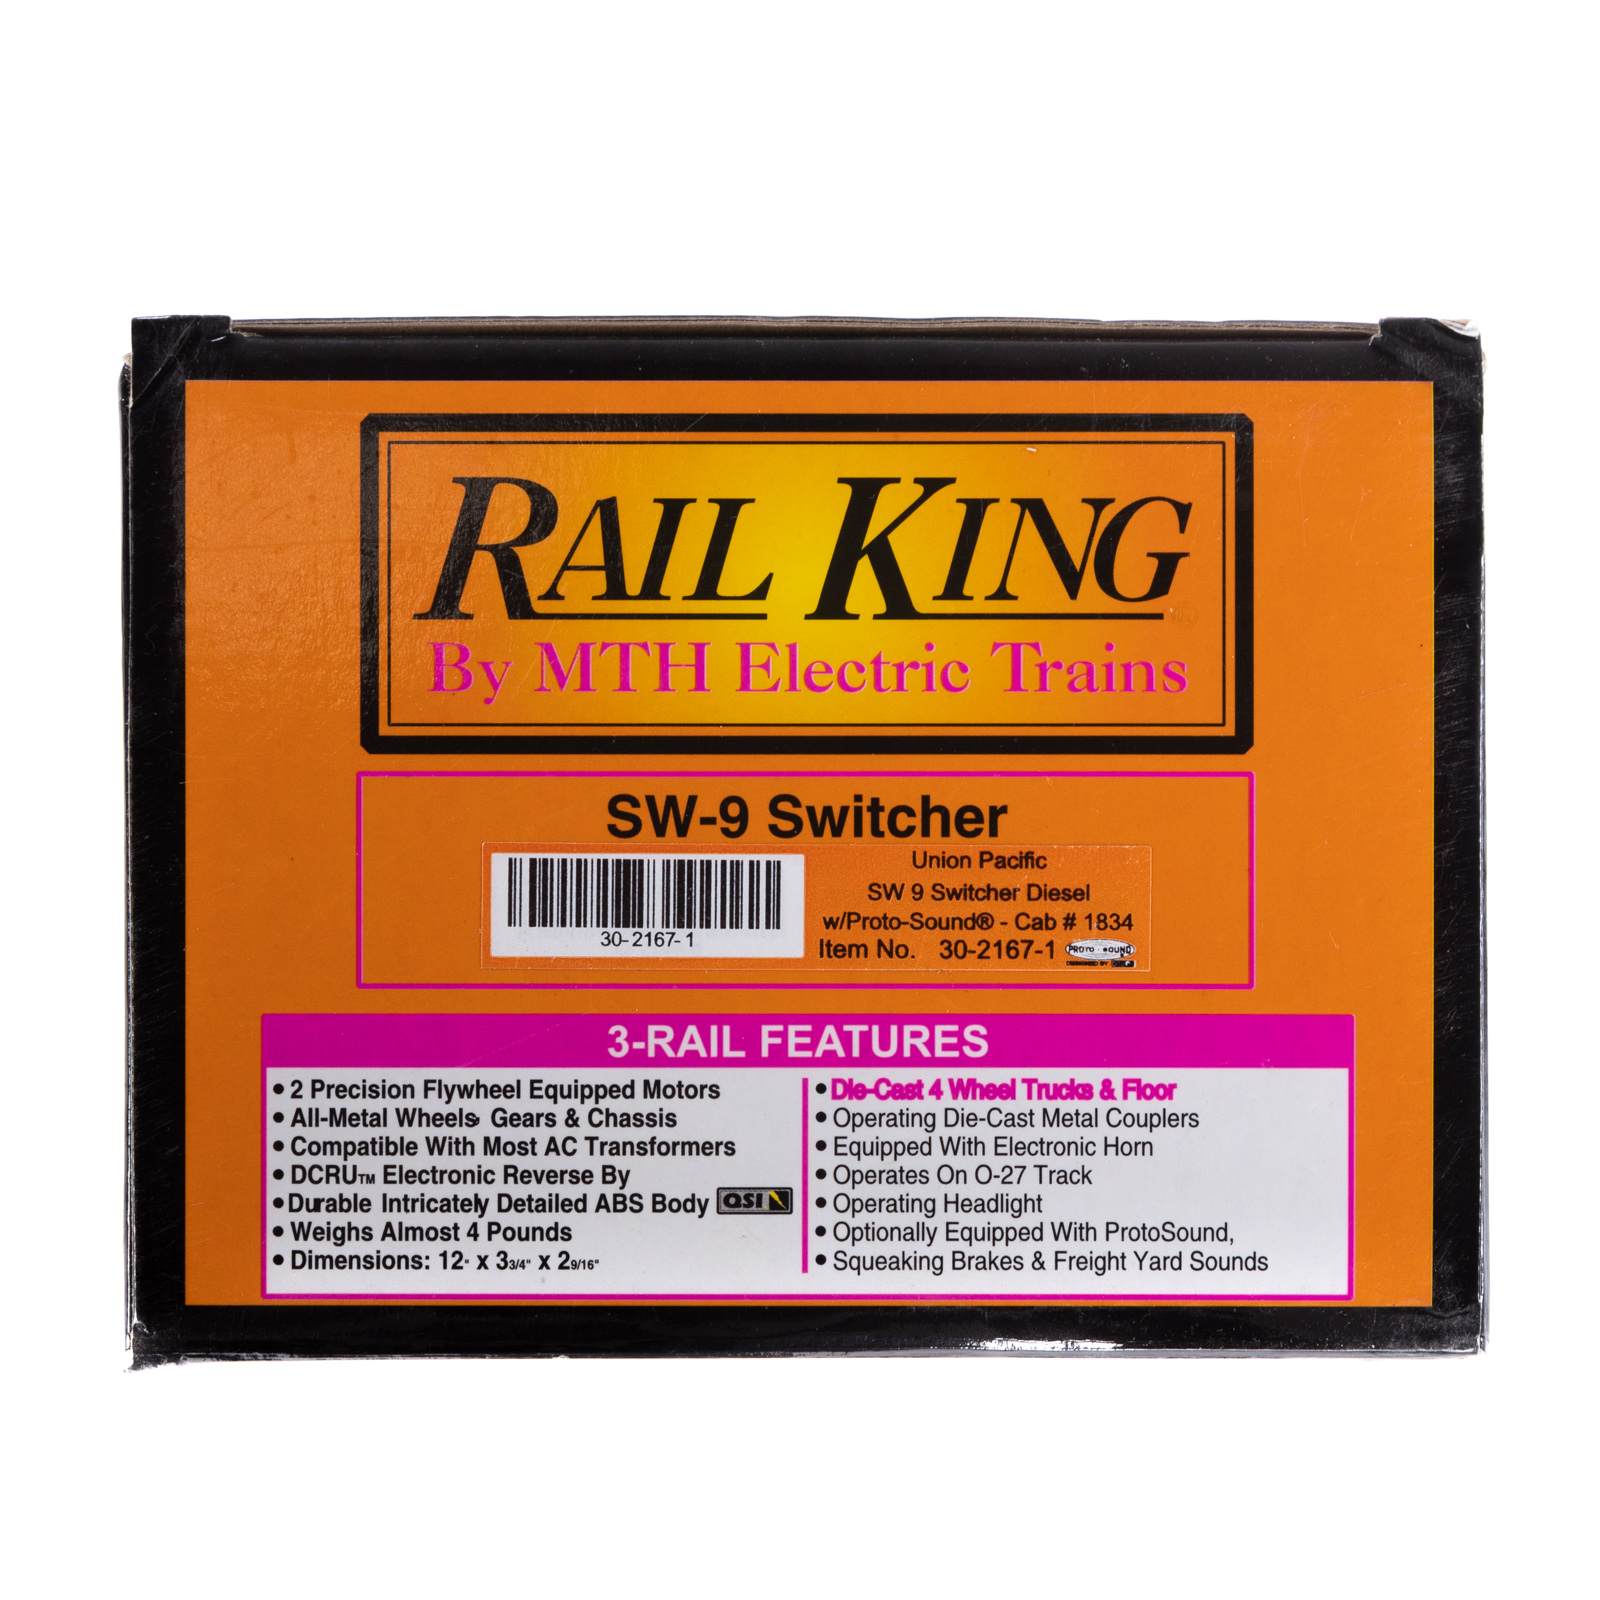 RAIL KING SW 9 SWITCHER Union Pacific  36a186